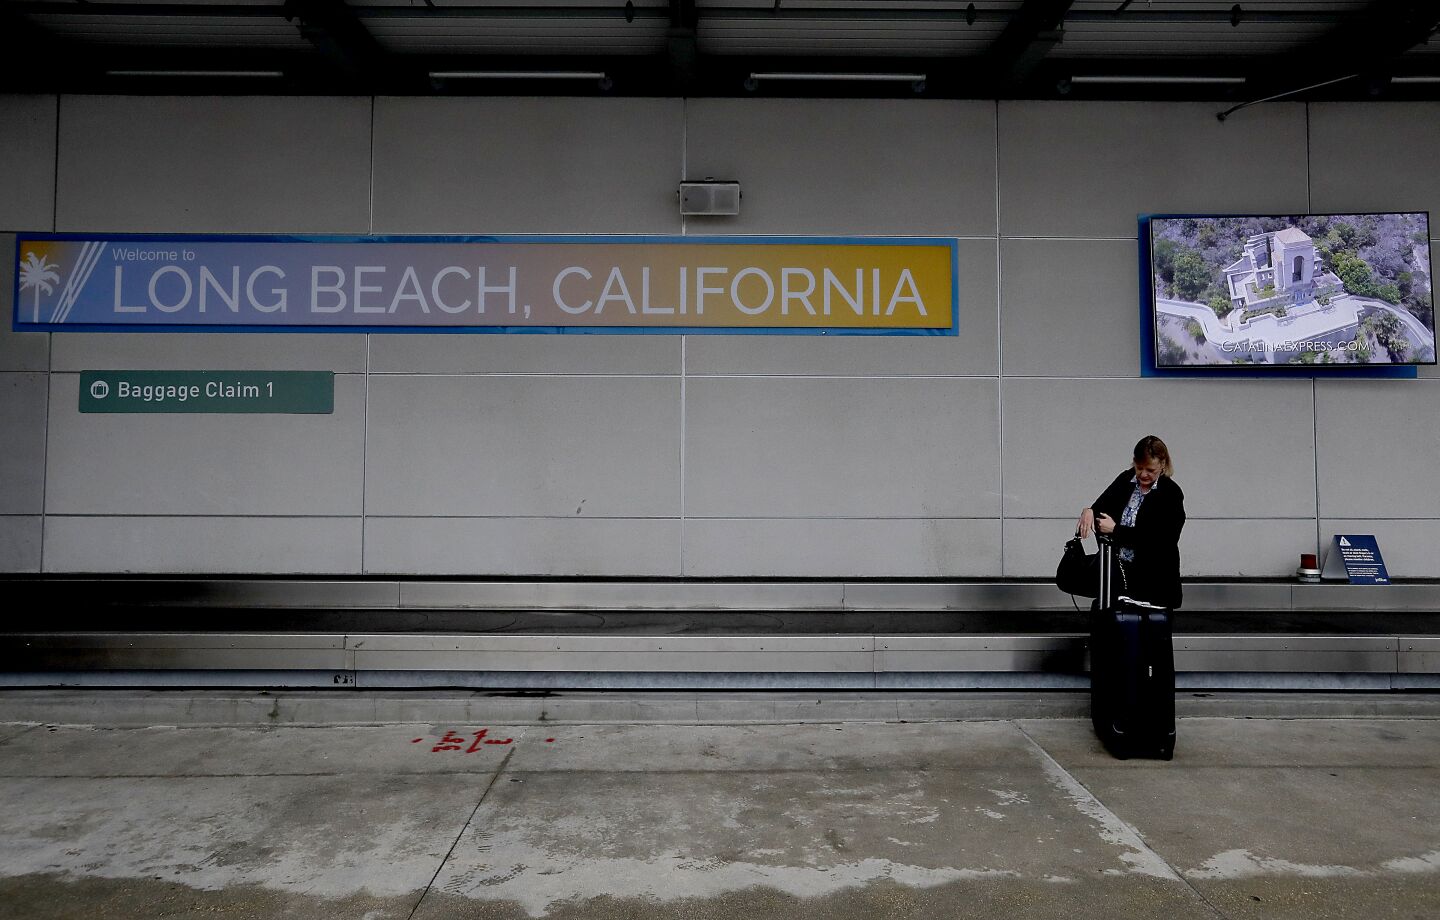 A woman claims her luggage at he Long Beach Airport.